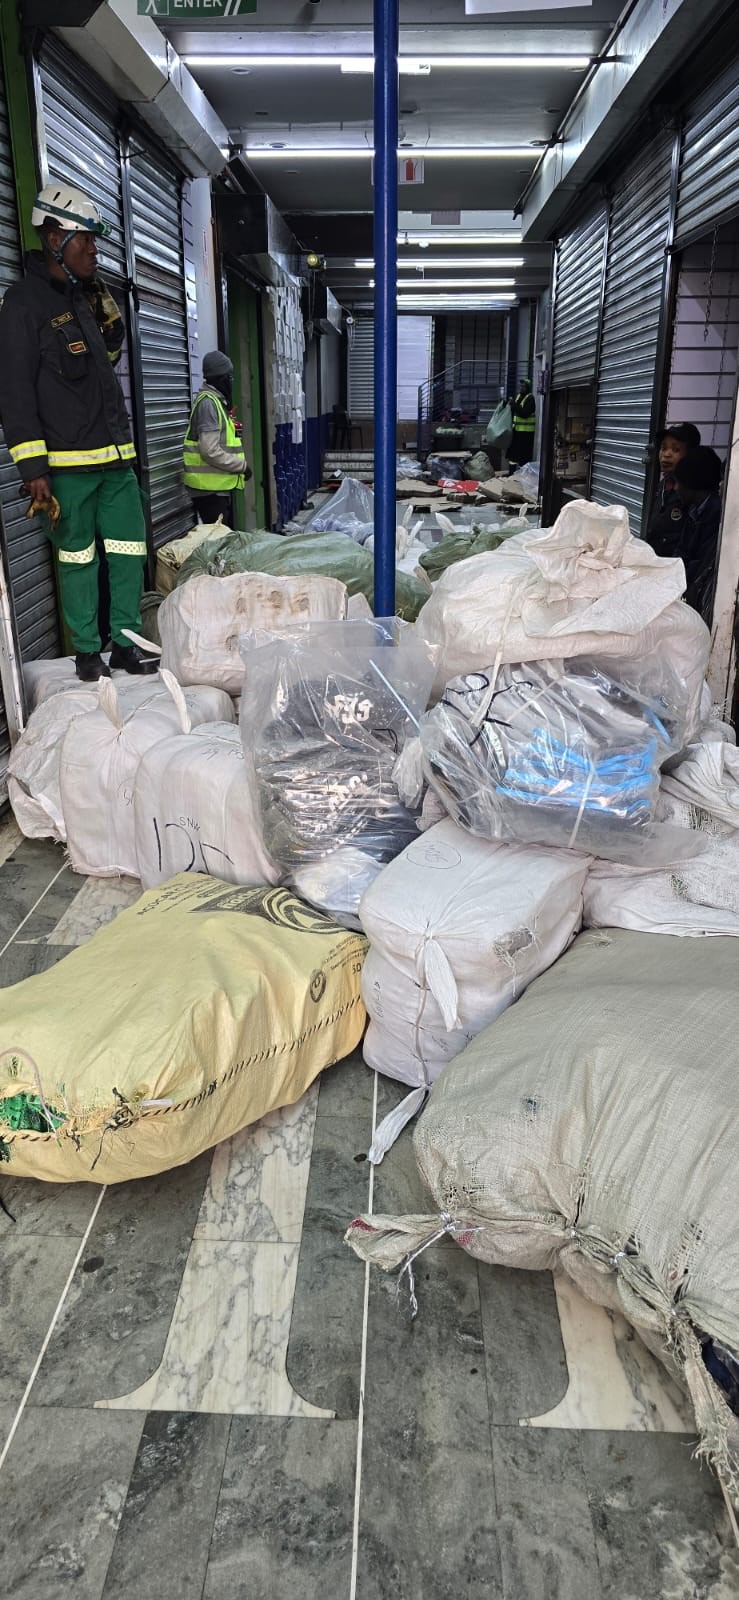 Police seize over 18 000 counterfeit items worth R15.5 million in the Johannesburg CBD